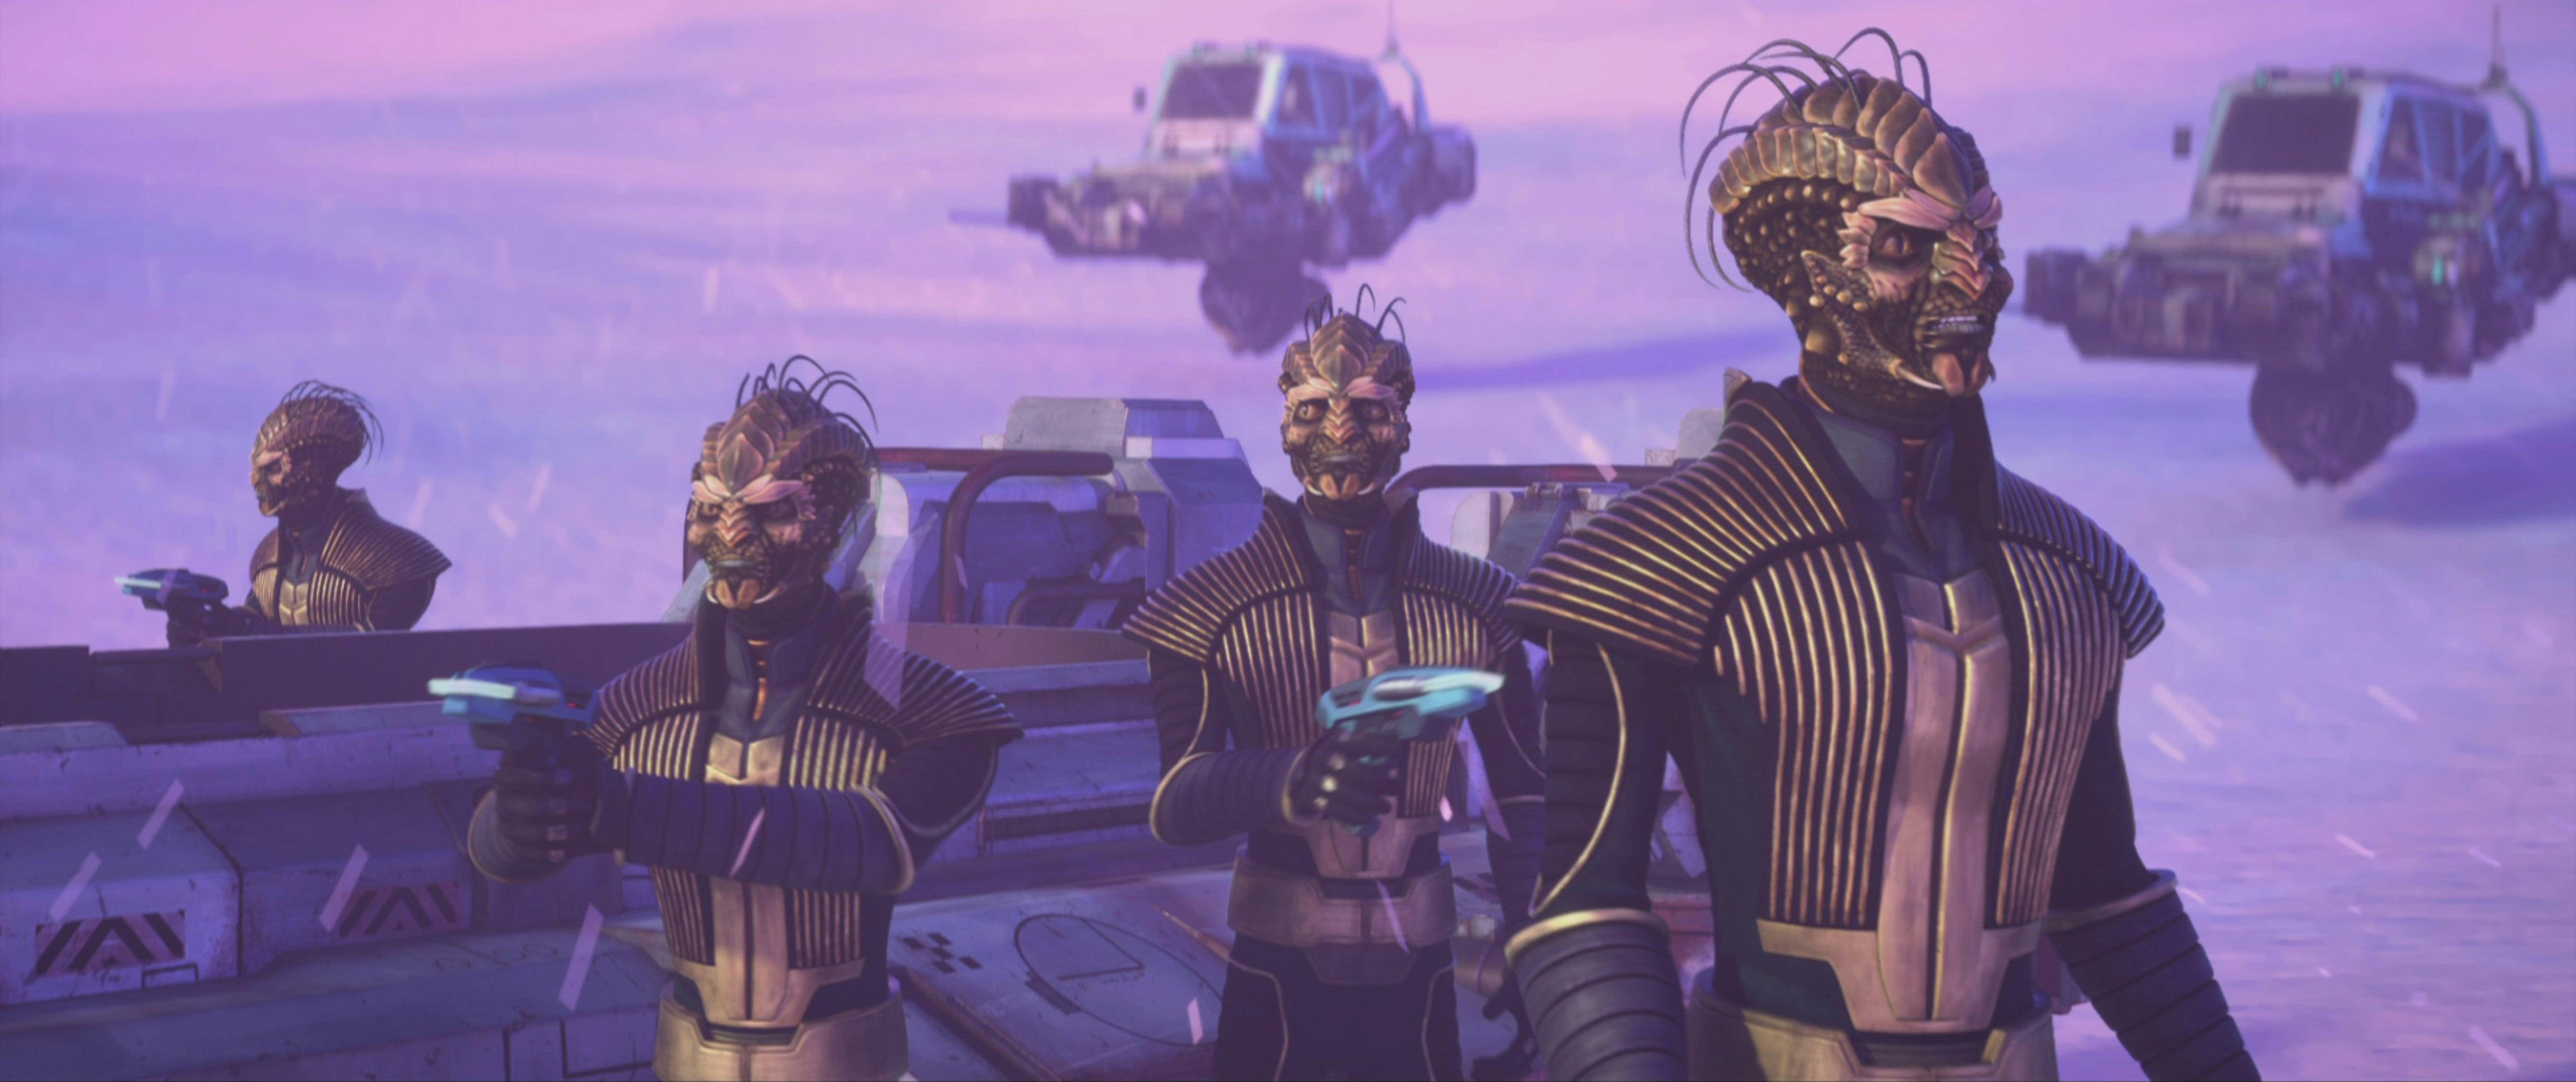 Xindi guards stand on a snowy planet.